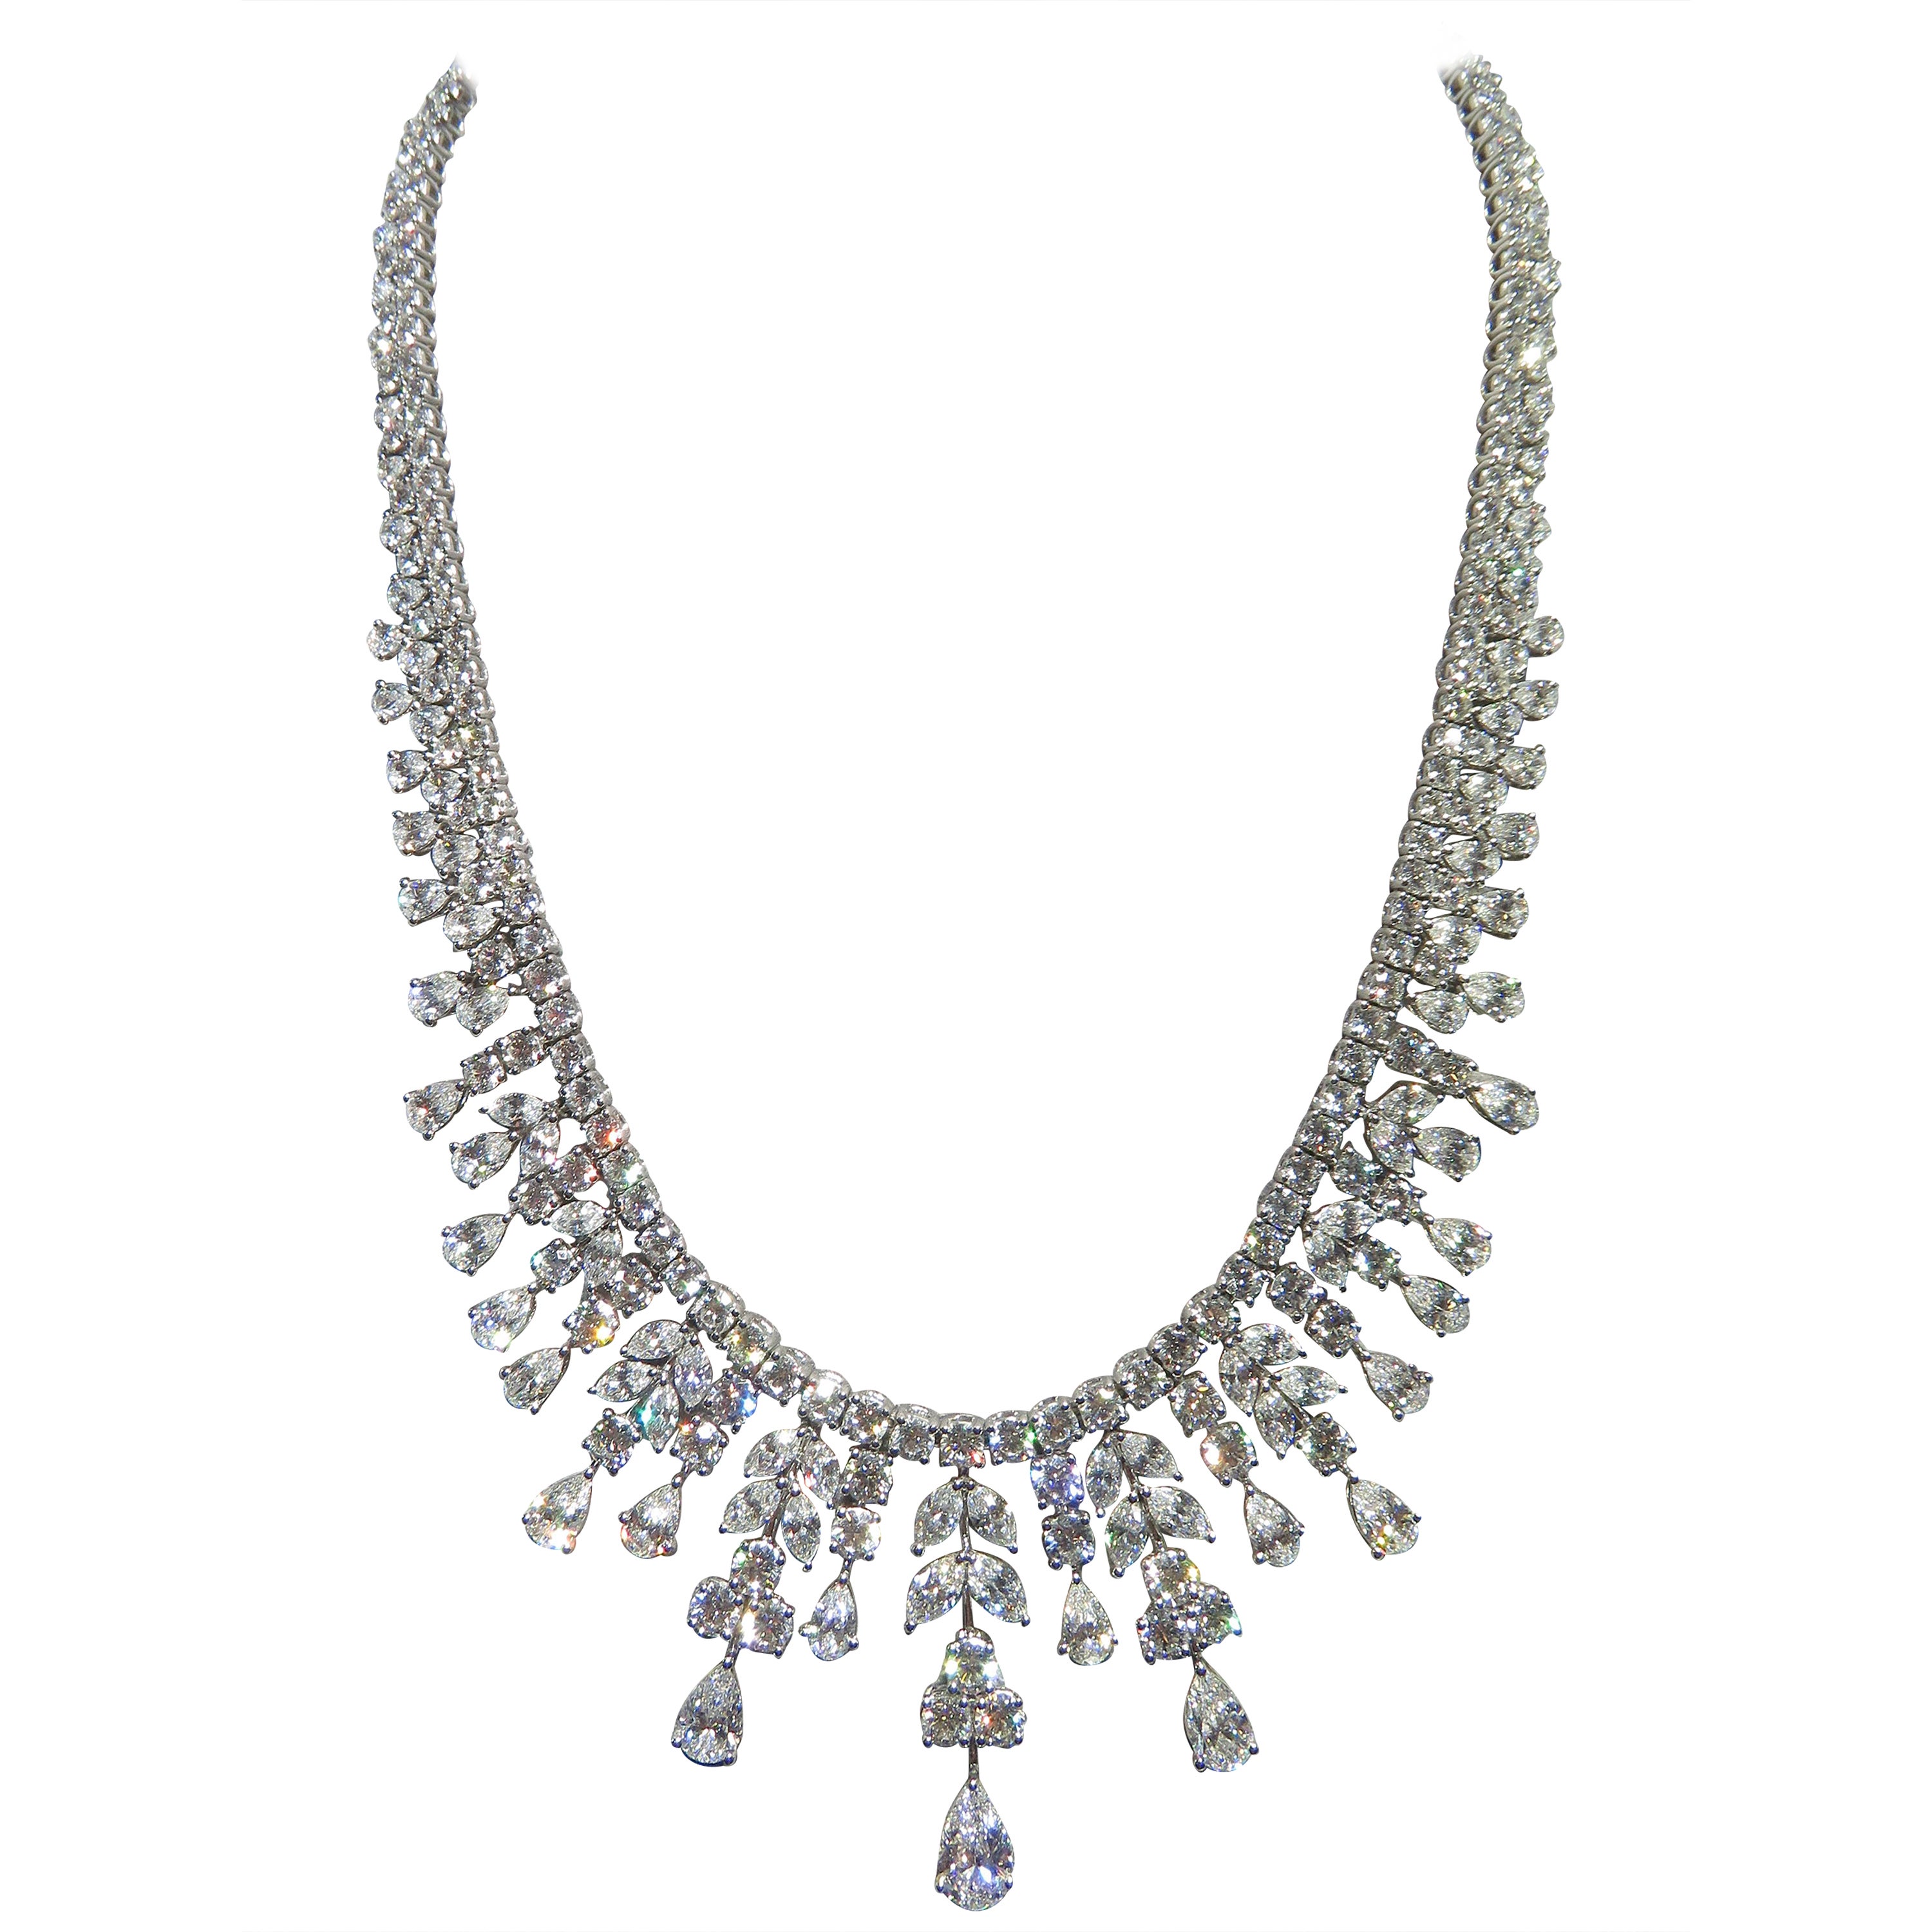 NWT $395, 000 Magnificent 44CT GAL Certified Winston Style Diamond Necklace